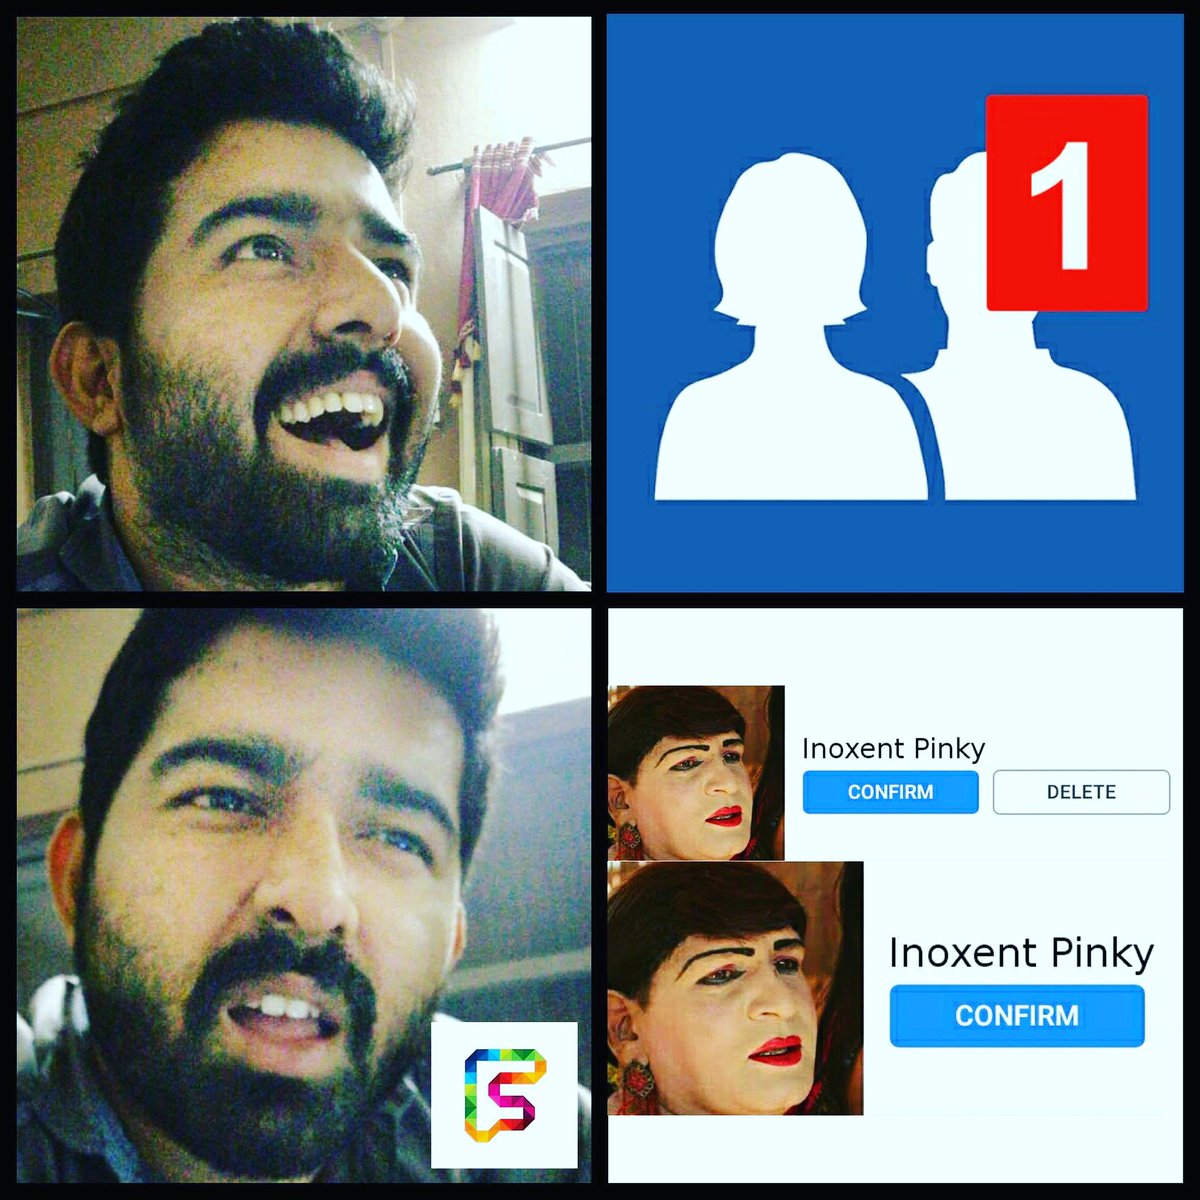 Funtography در توییتر Friend Request Friendrequest Fb Facebook Follow Friends Friendshipgoals Friendz Friendzone Friendshipquotes Innocent Pinky Excited Awkward Memes Meme Memesdaily Funnymemes Fun Hilariousmemes Hilarious